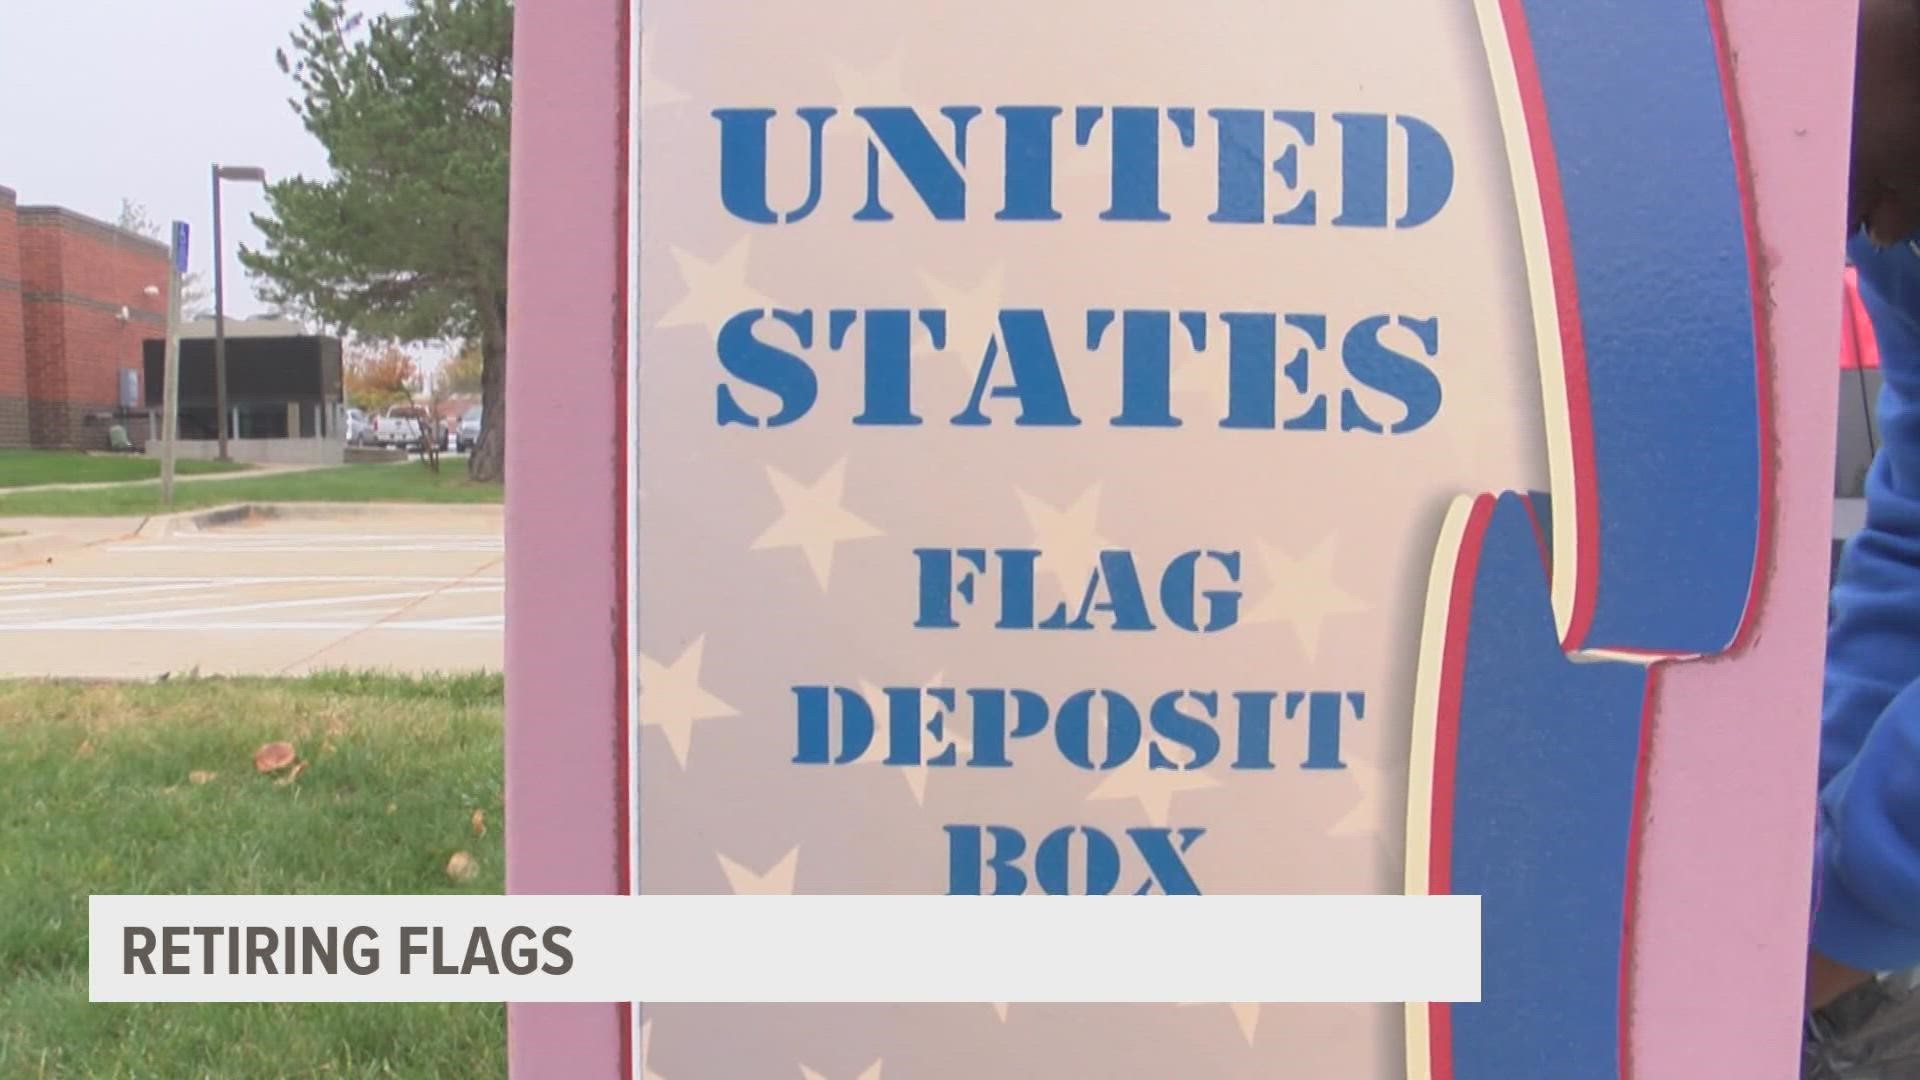 A veteran who served in Desert Shield and Desert Storm now continues his service to the country by helping to retire flags in West Des Moines.